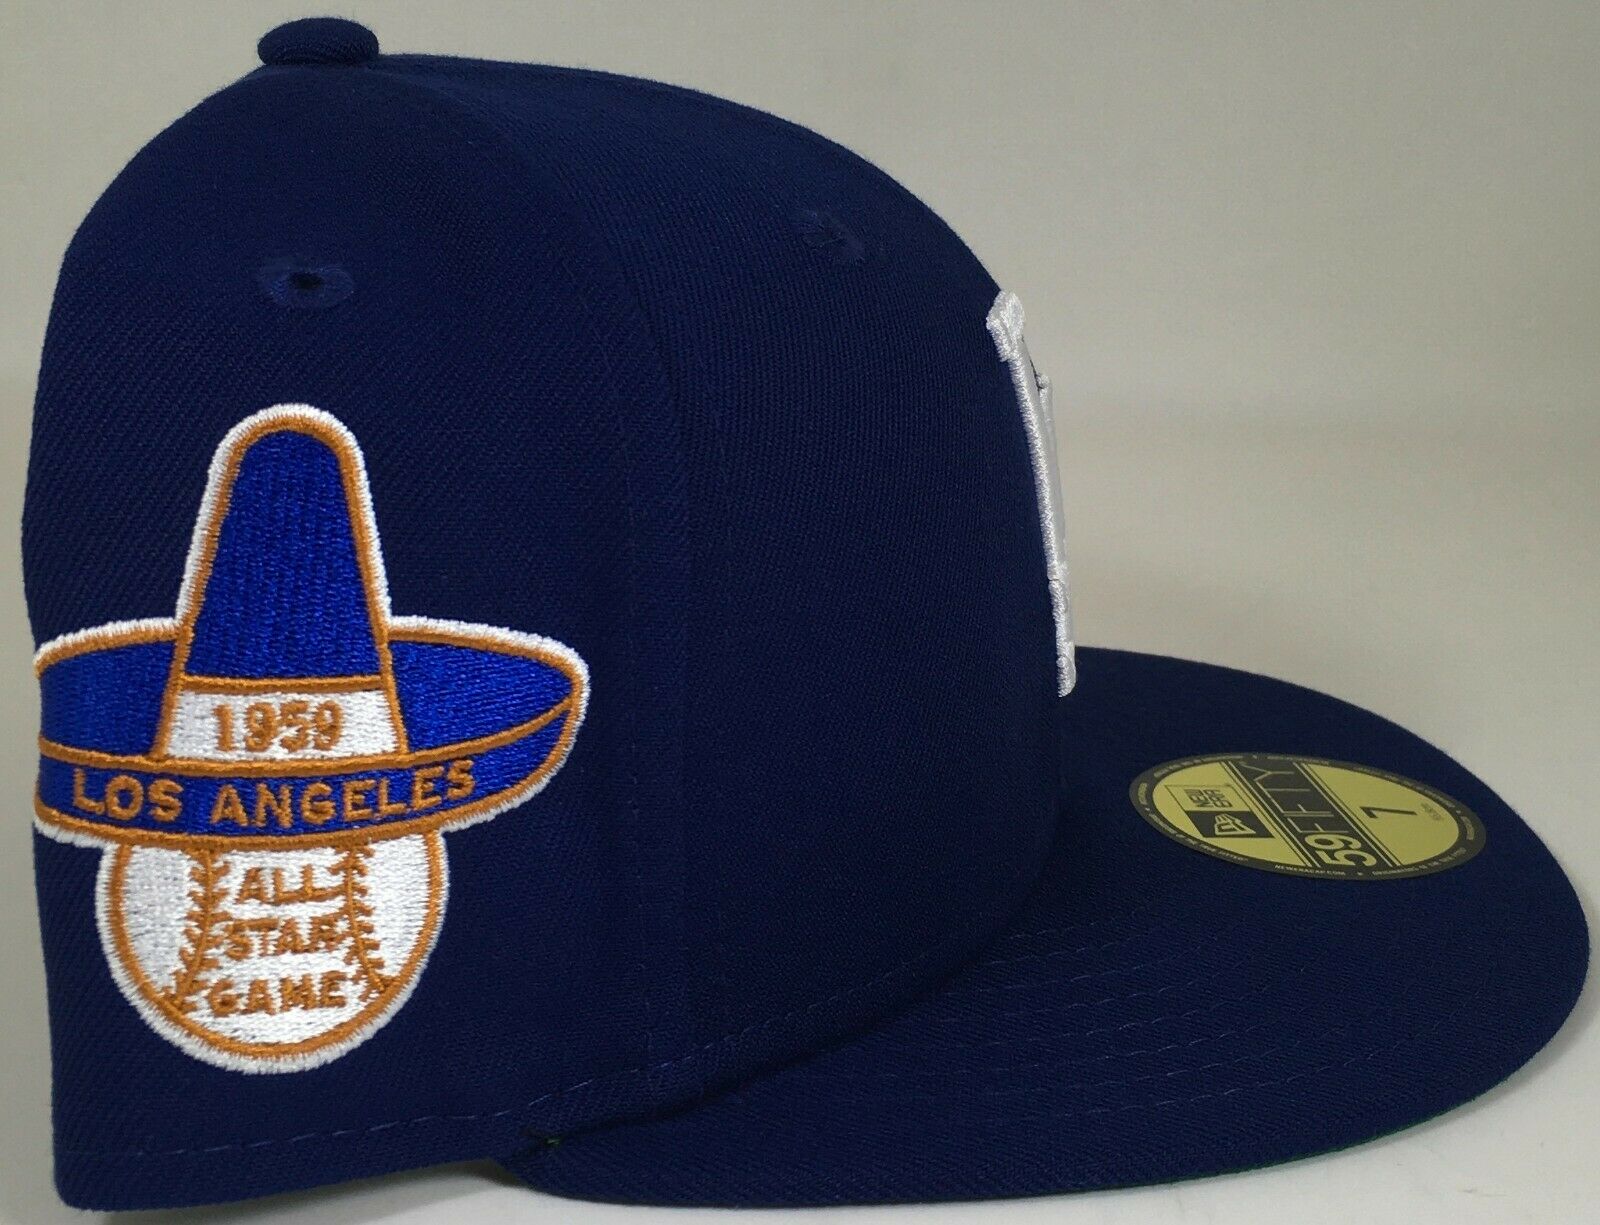 Los Angeles Dodgers 1959 World Series Collector Patch – The Emblem